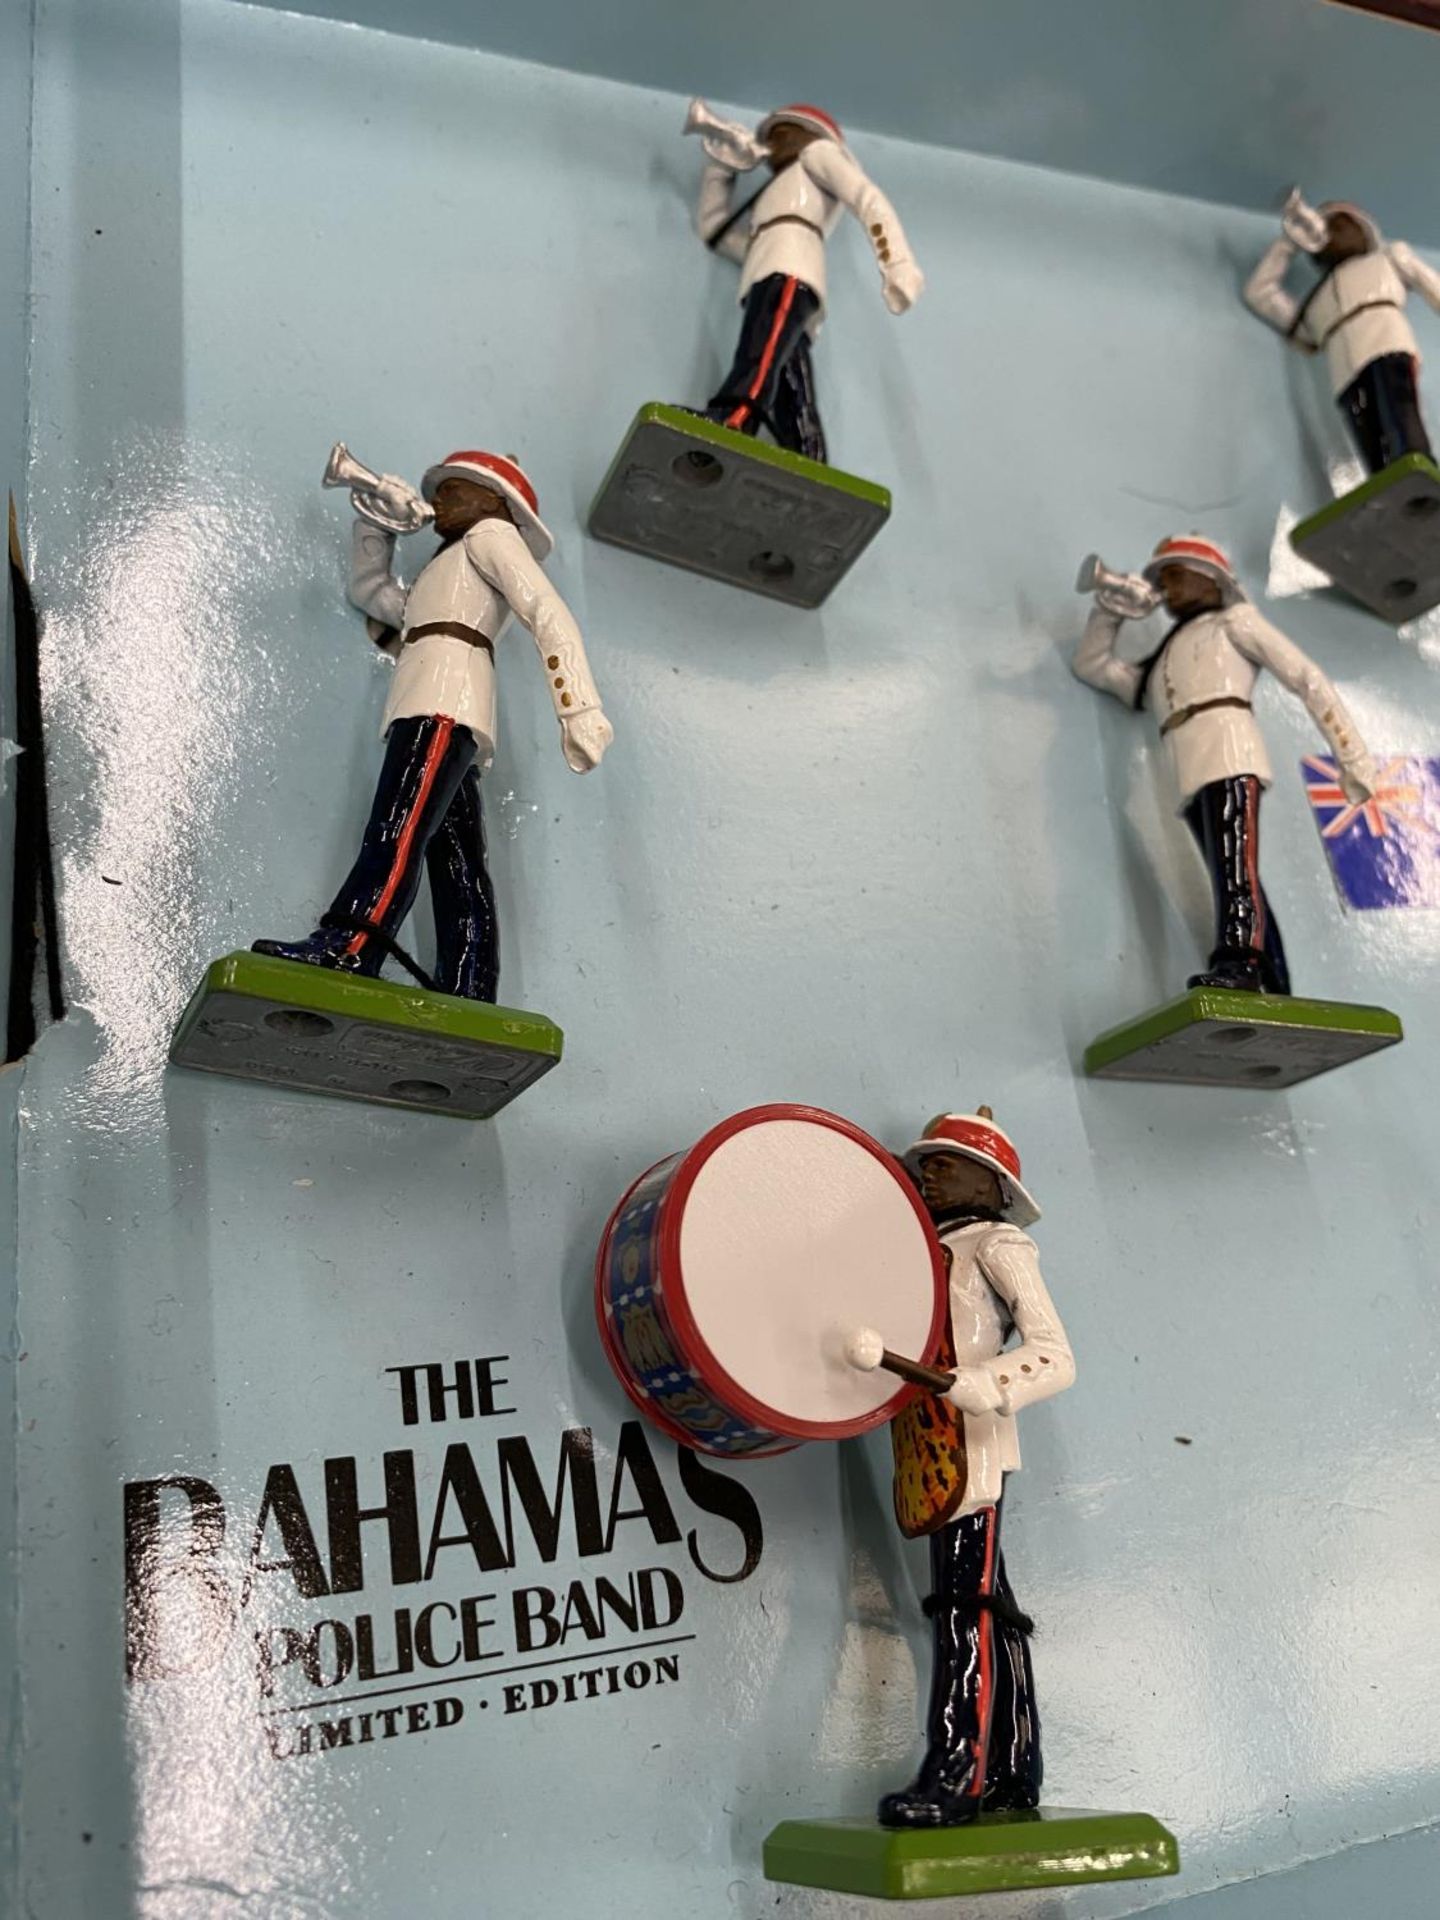 A BOXED BRITAINS 1987 NO 2186 OF 5000 LIMITED EDITION SET OF THE BAHAMAS POLICE BAND - Image 6 of 6